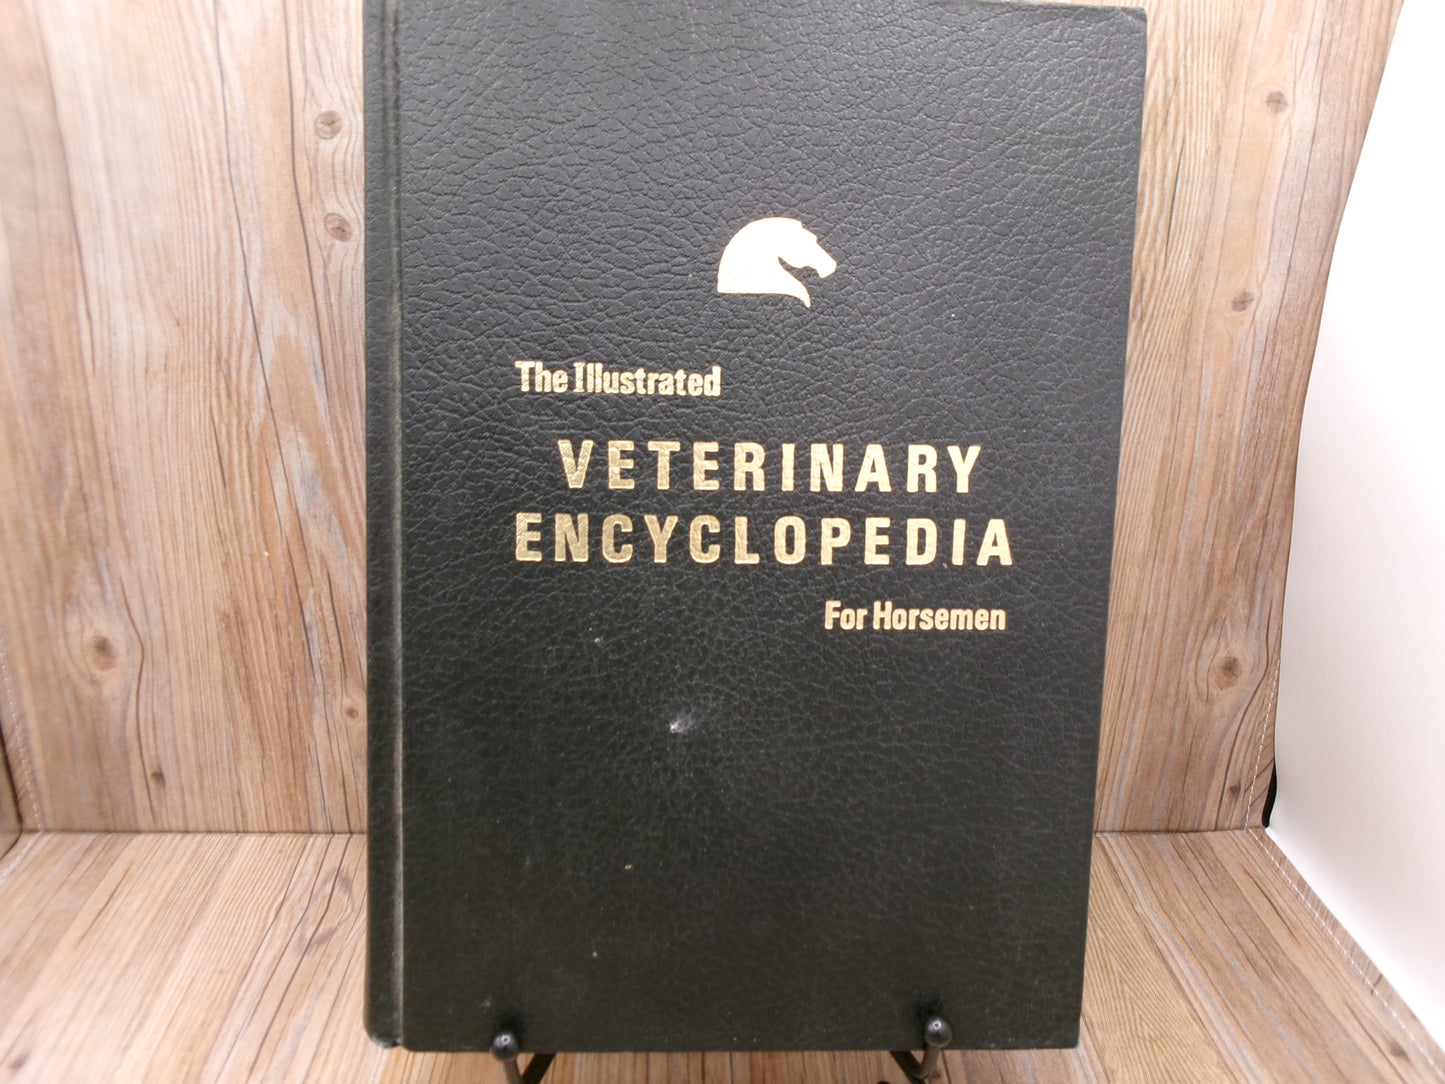 The Illustrated Veterinary Encyclopedia by Don Wagoner